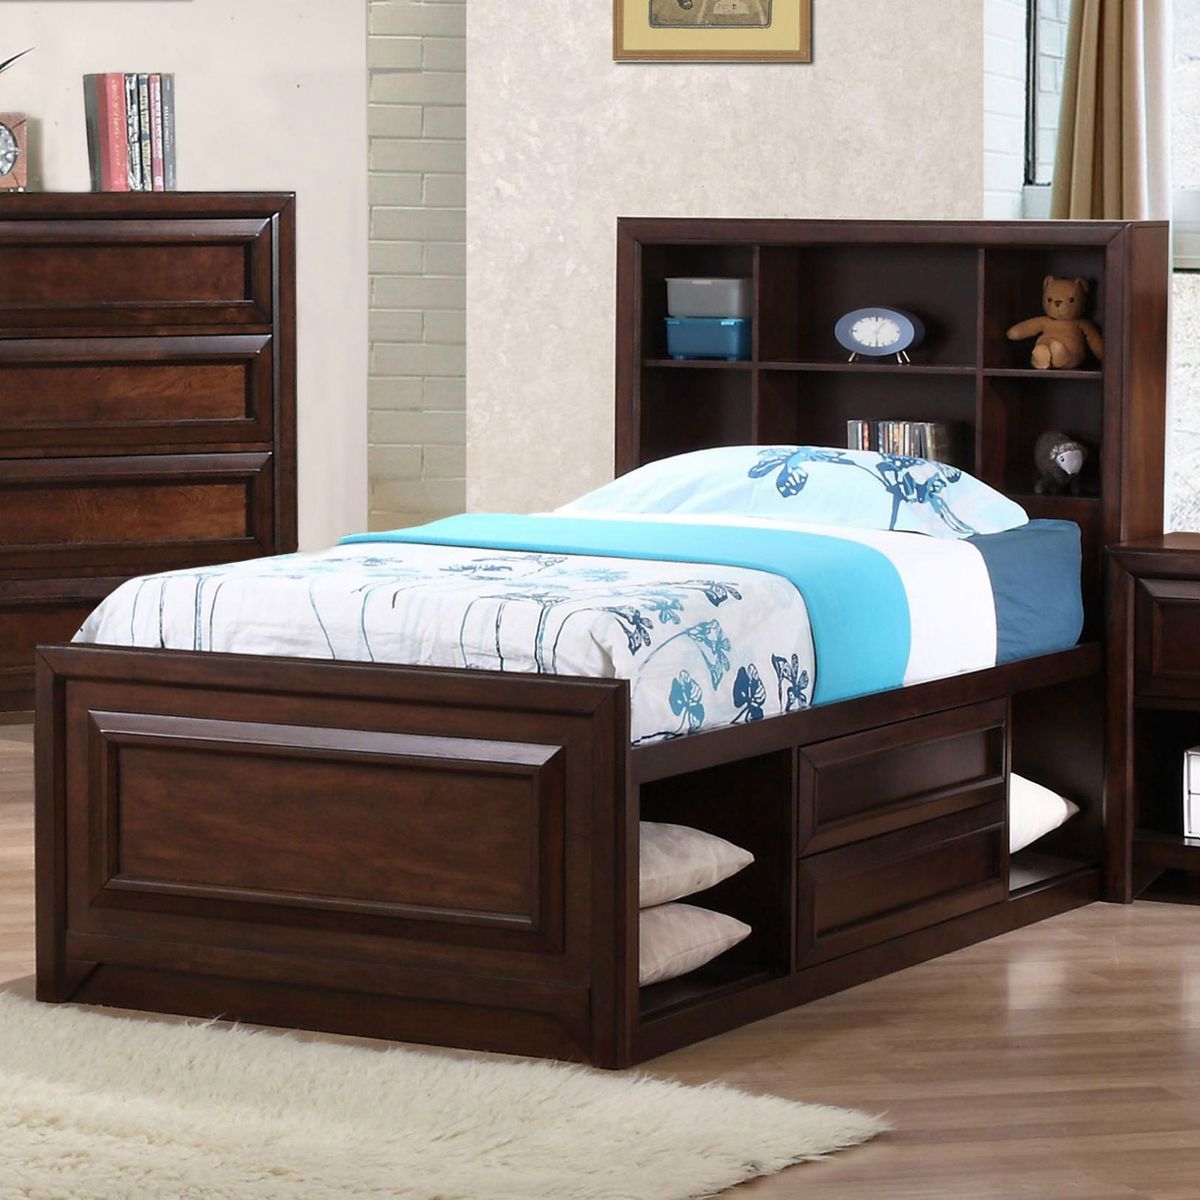   Modern Full Captains Storage Bed Youth Bedroom Furniture